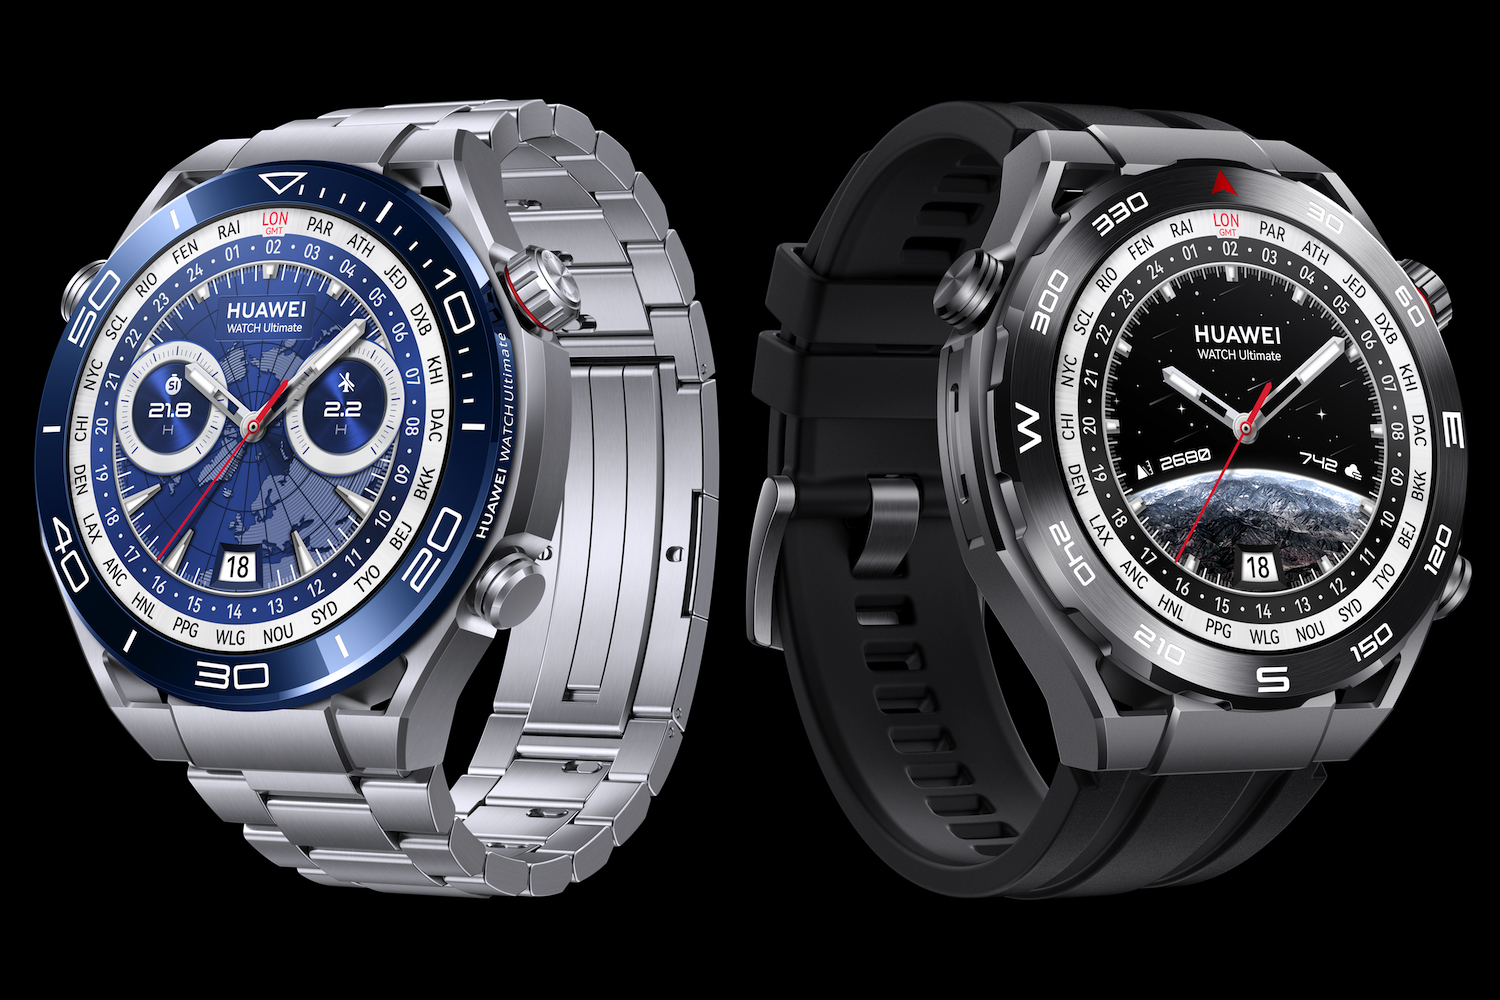 Huawei's Watch Ultra is a long-lasting rugged smartwatch that looks the part